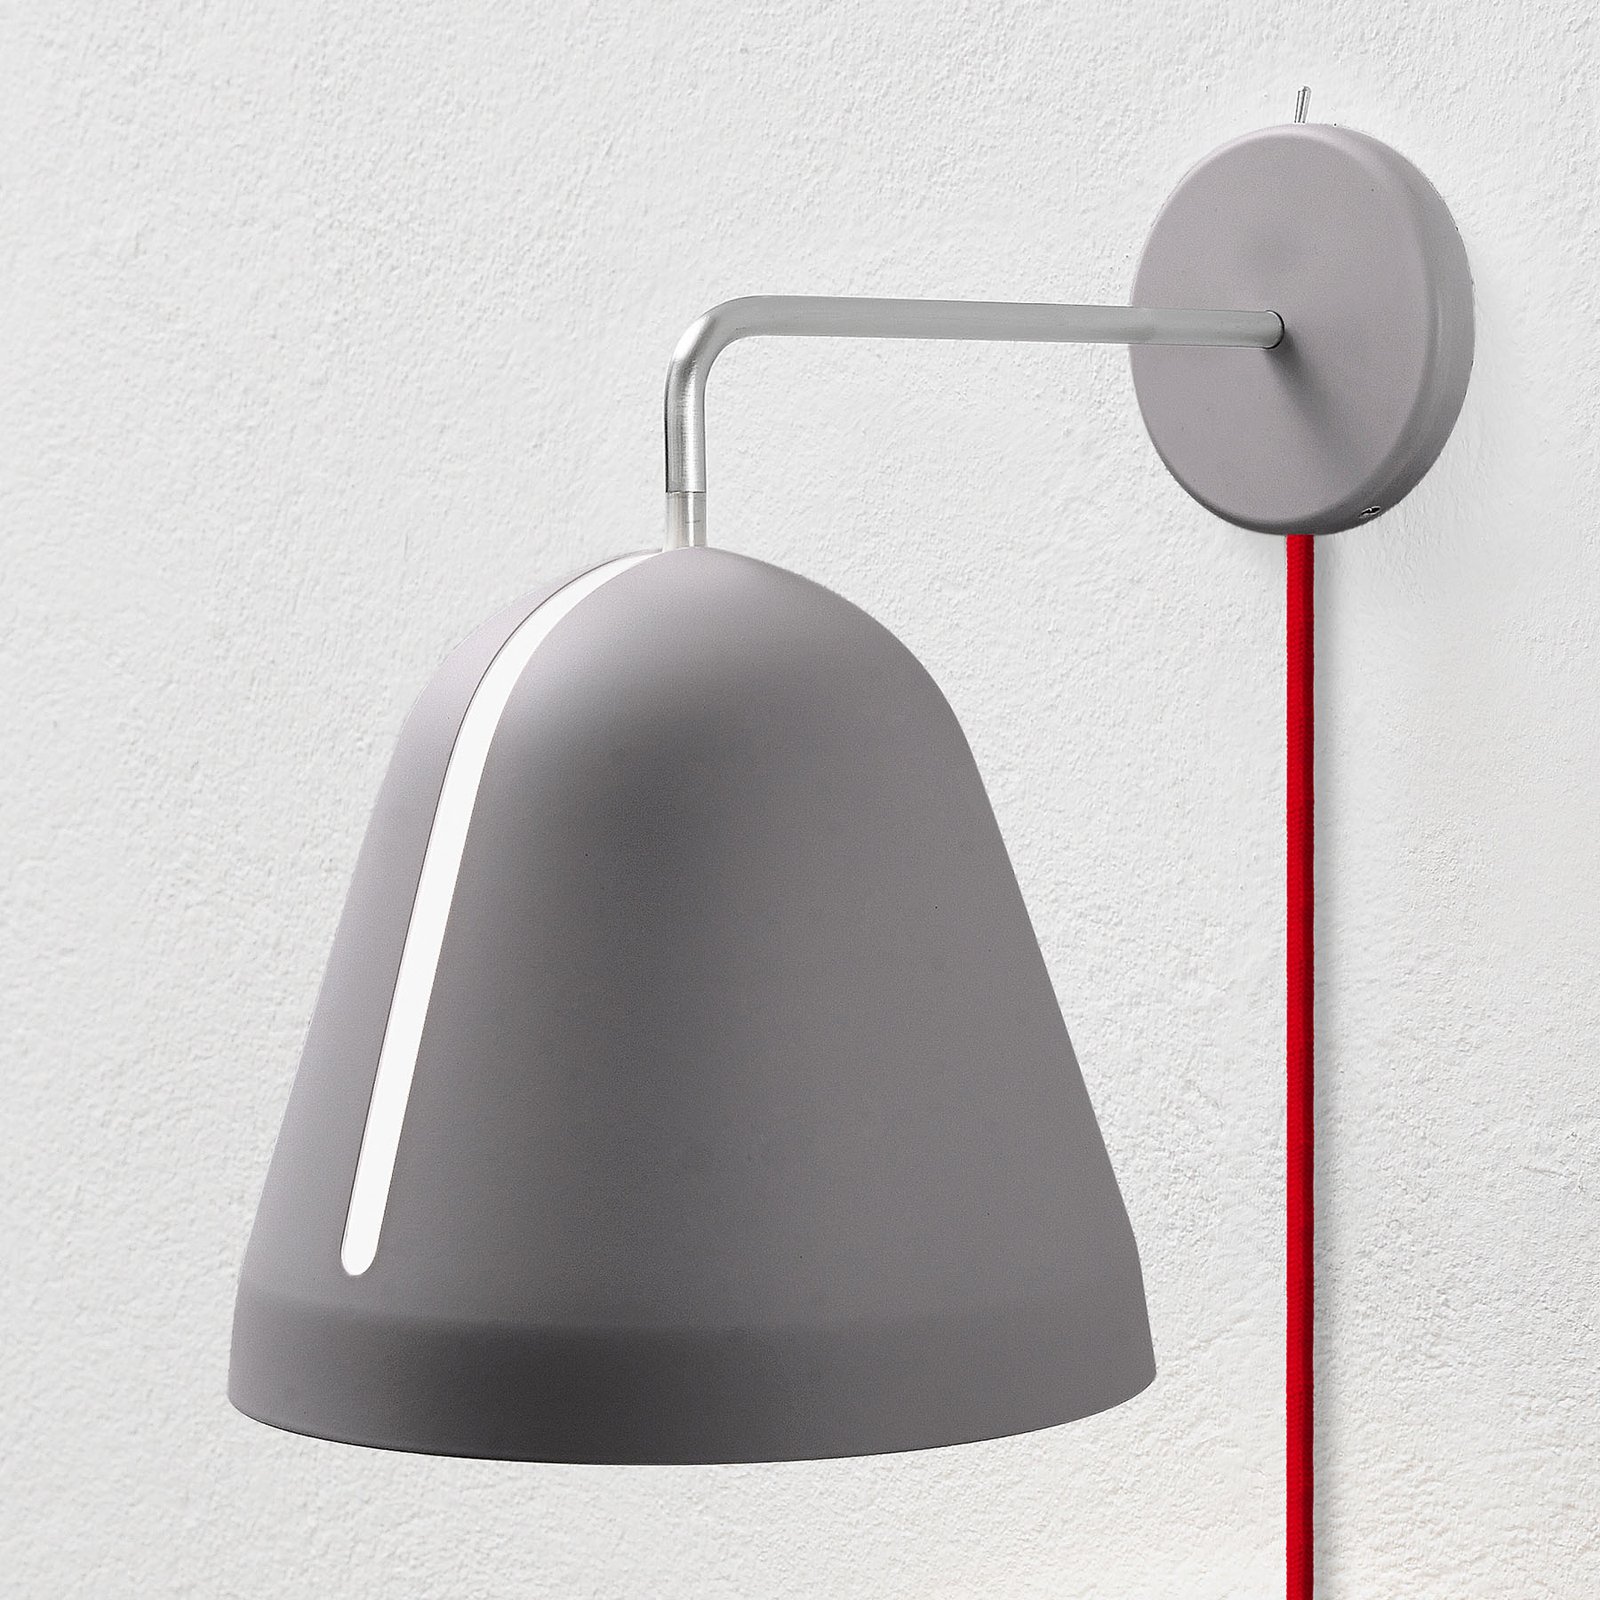 Nyta Tilt Wall wall light with a red cable, grey